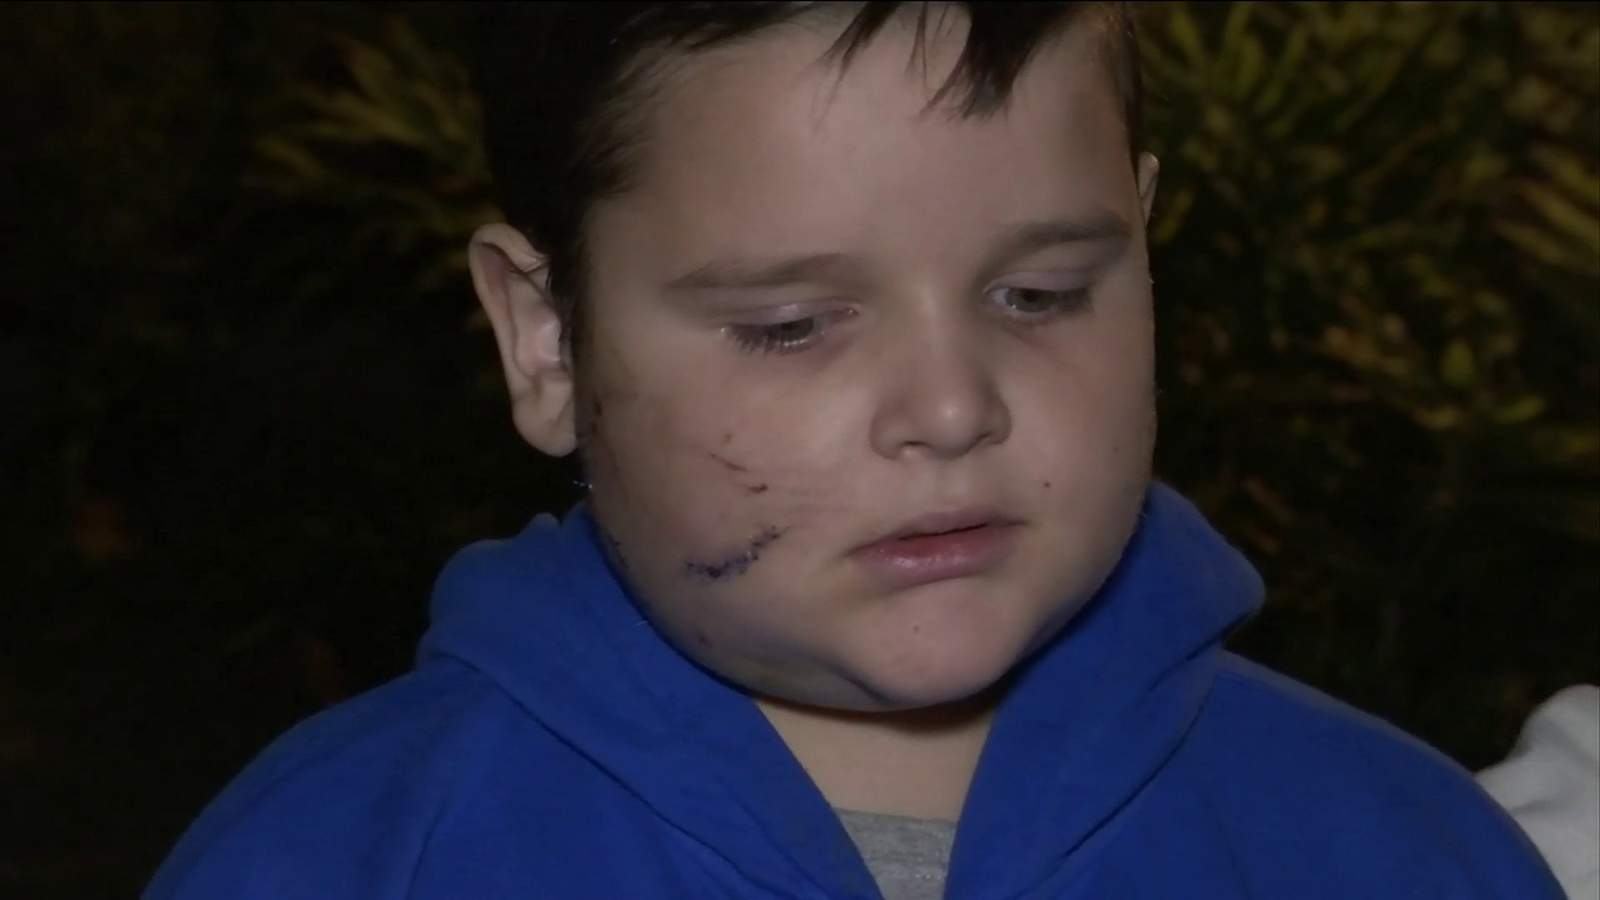 Mother asks for help after son mauled by dog